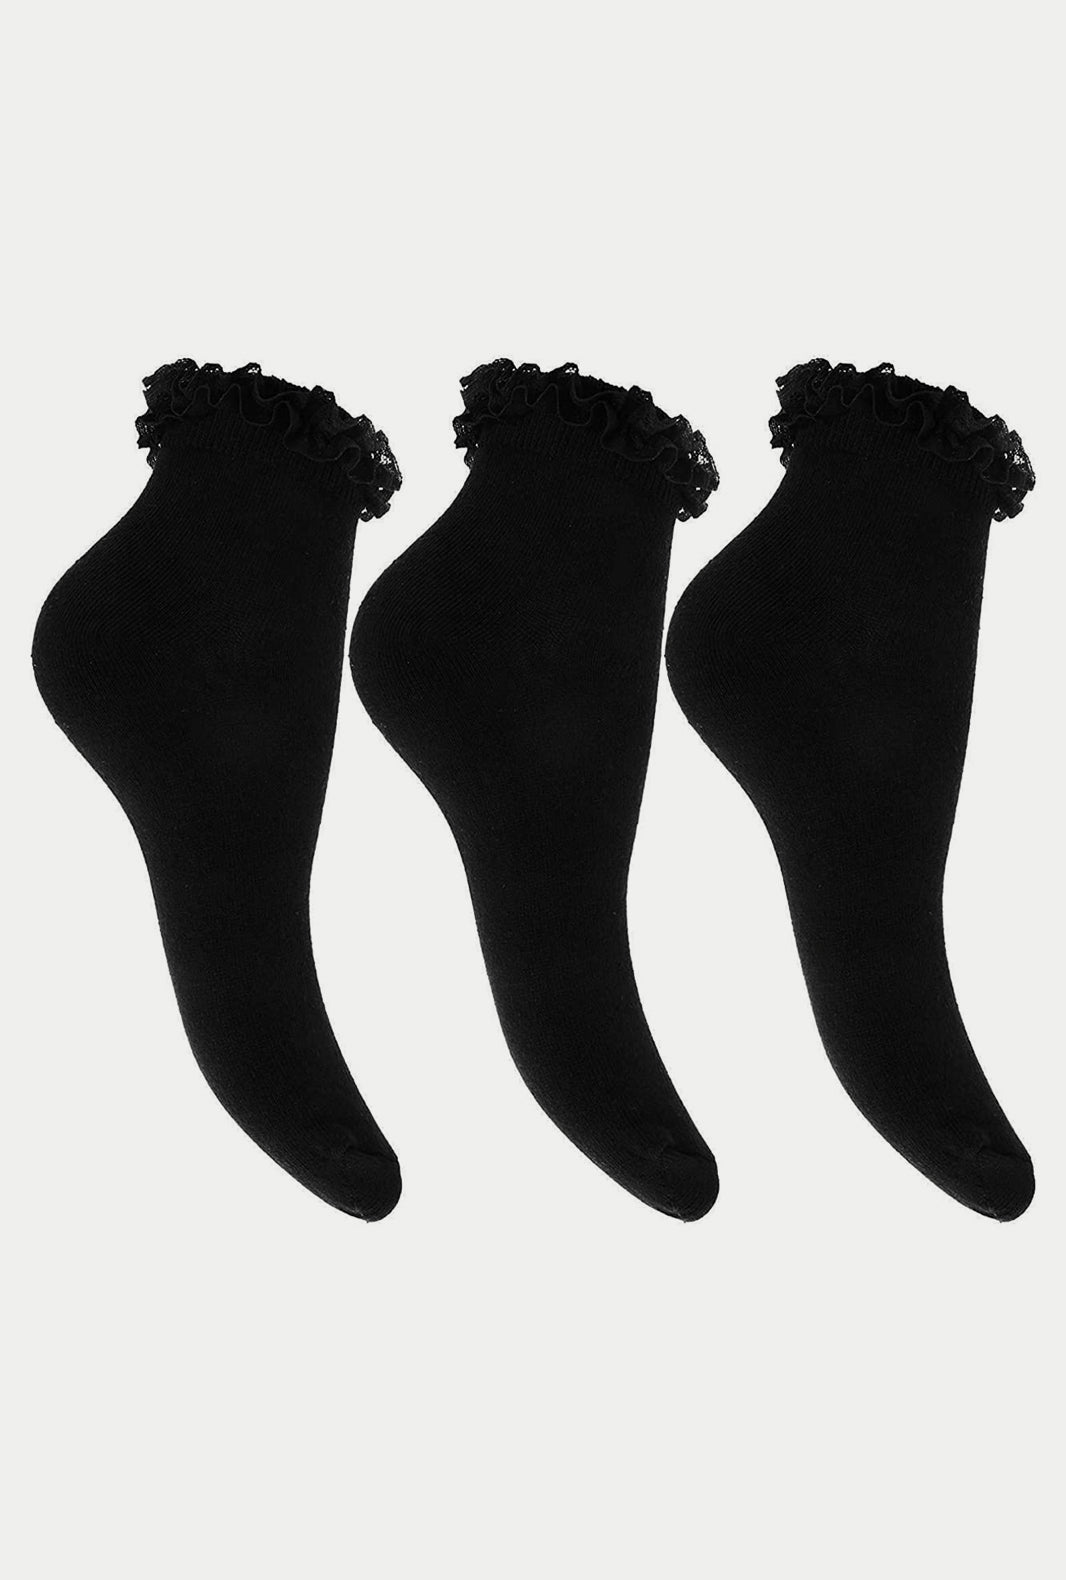 Girls 3 Pairs Ruffled Trim Frilly Lace Ankle Socks